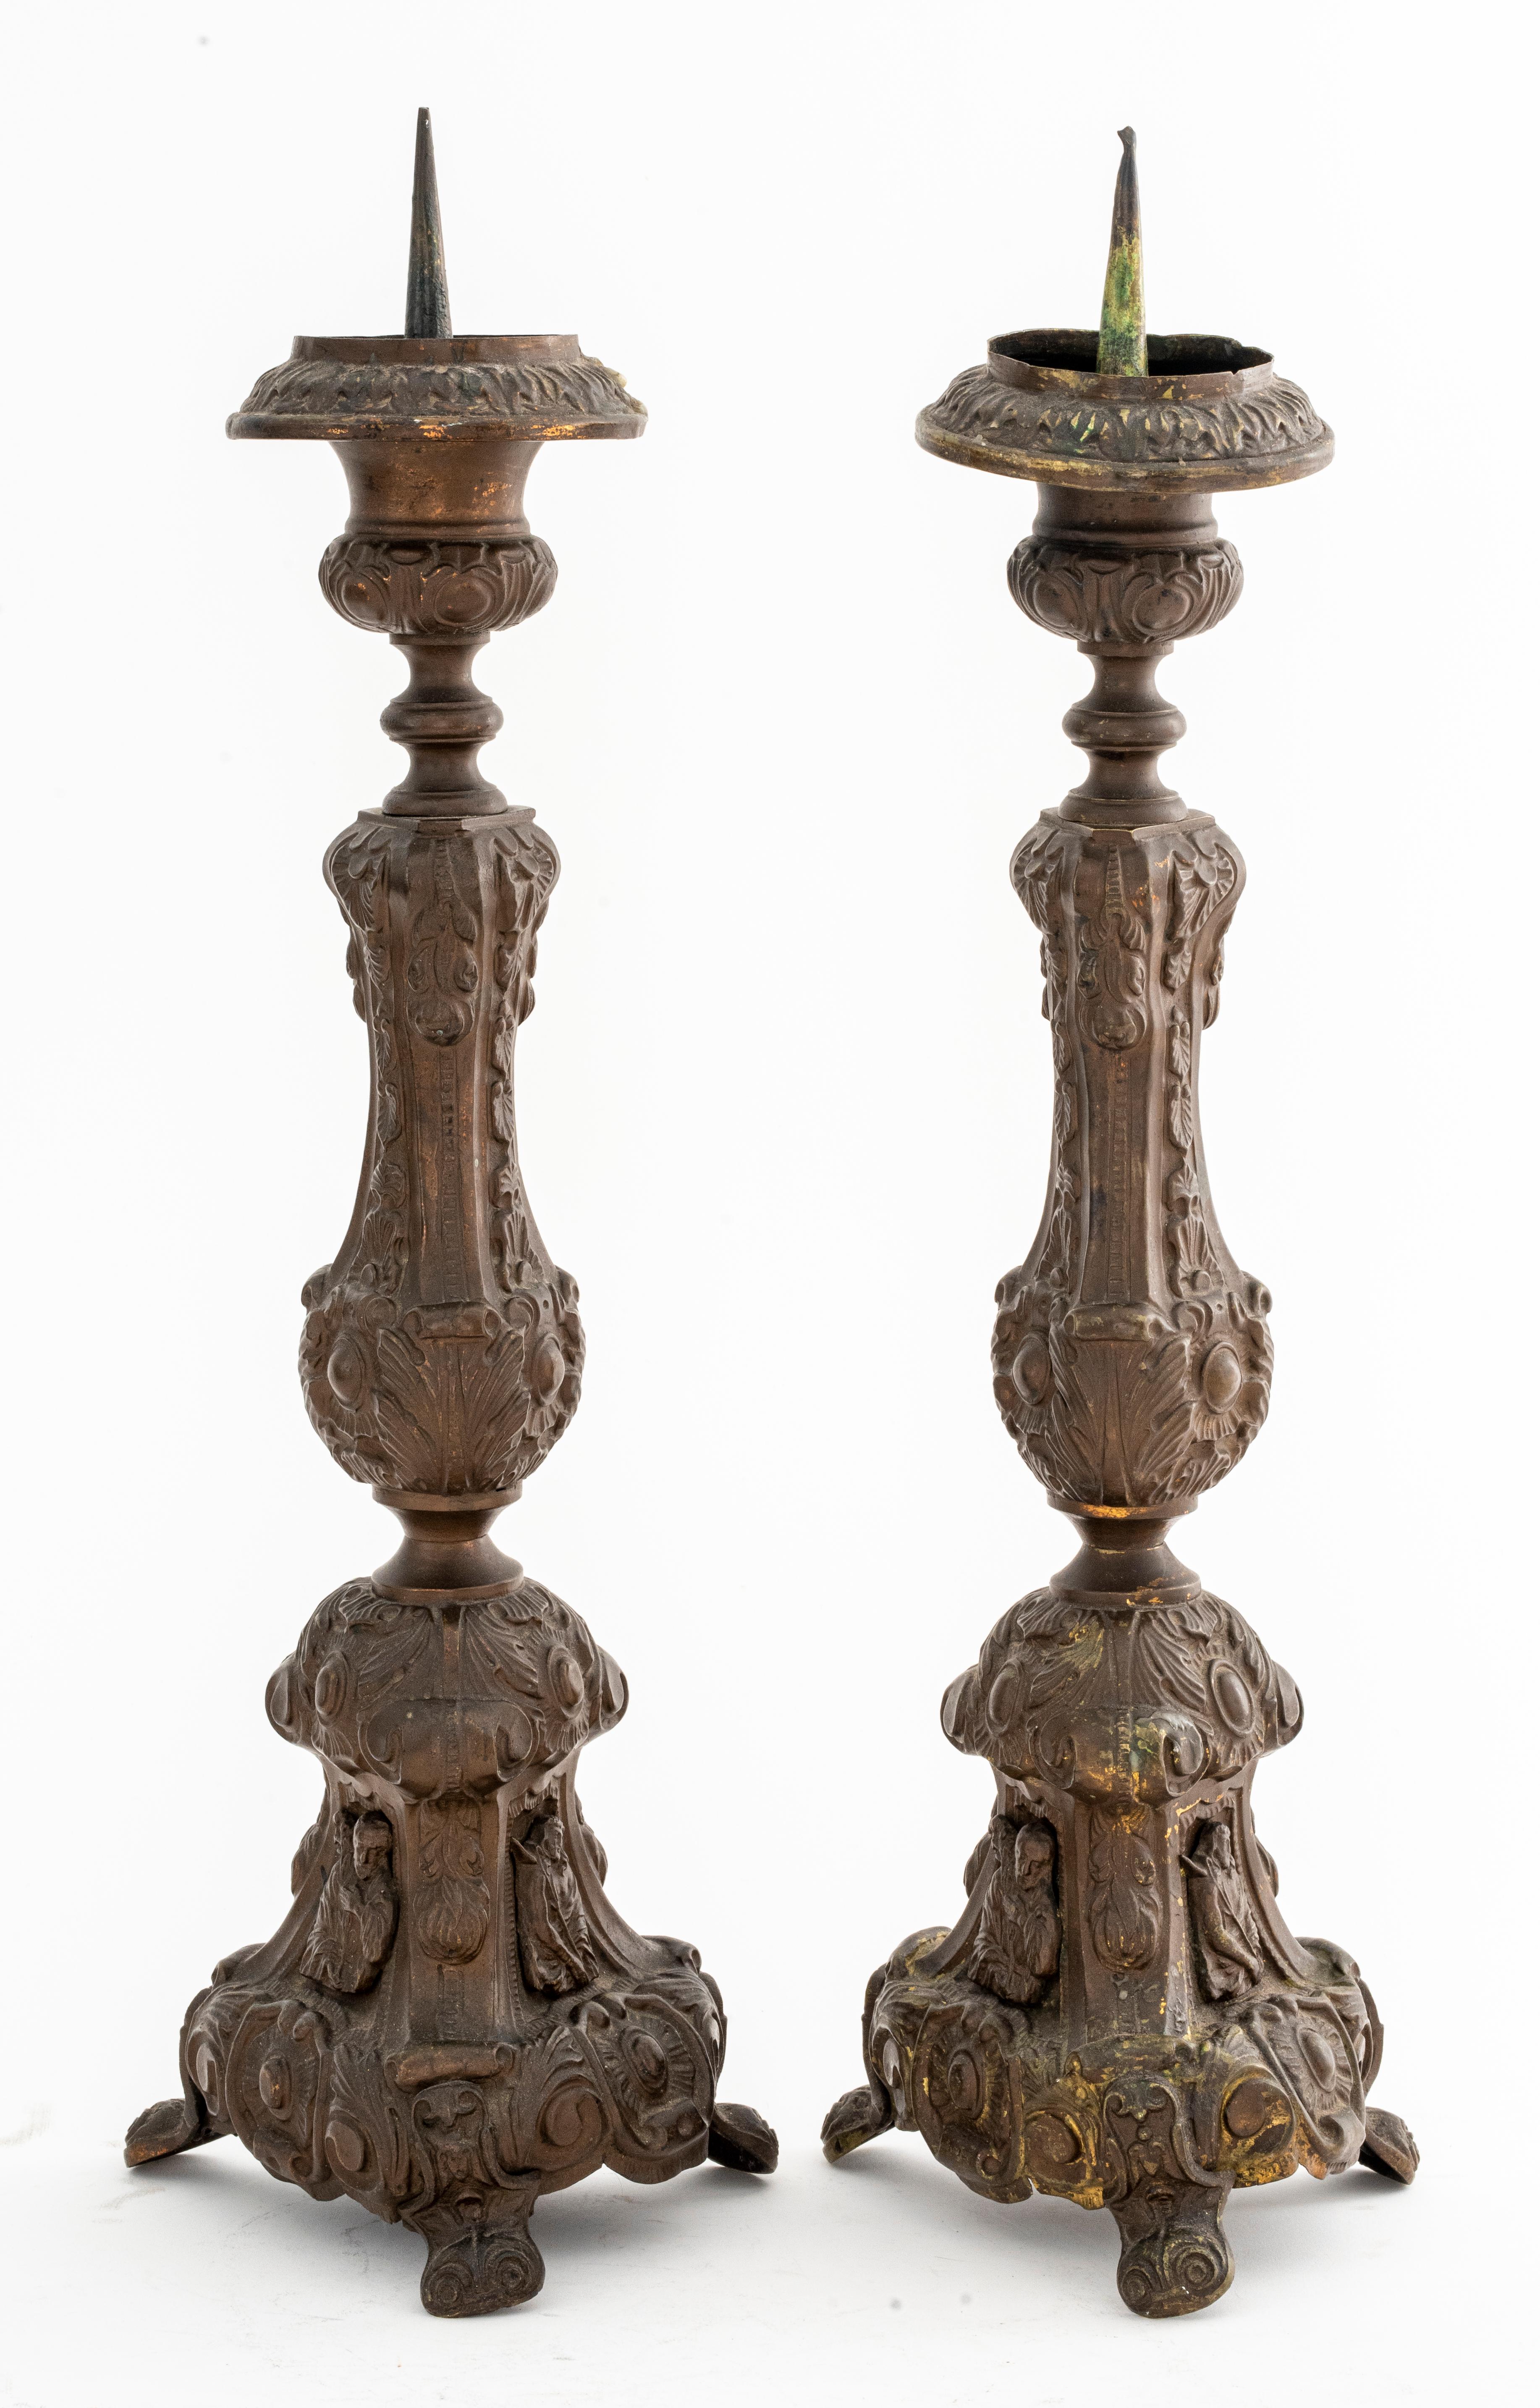 Baroque Revival pair of repousse brass candle pricks.